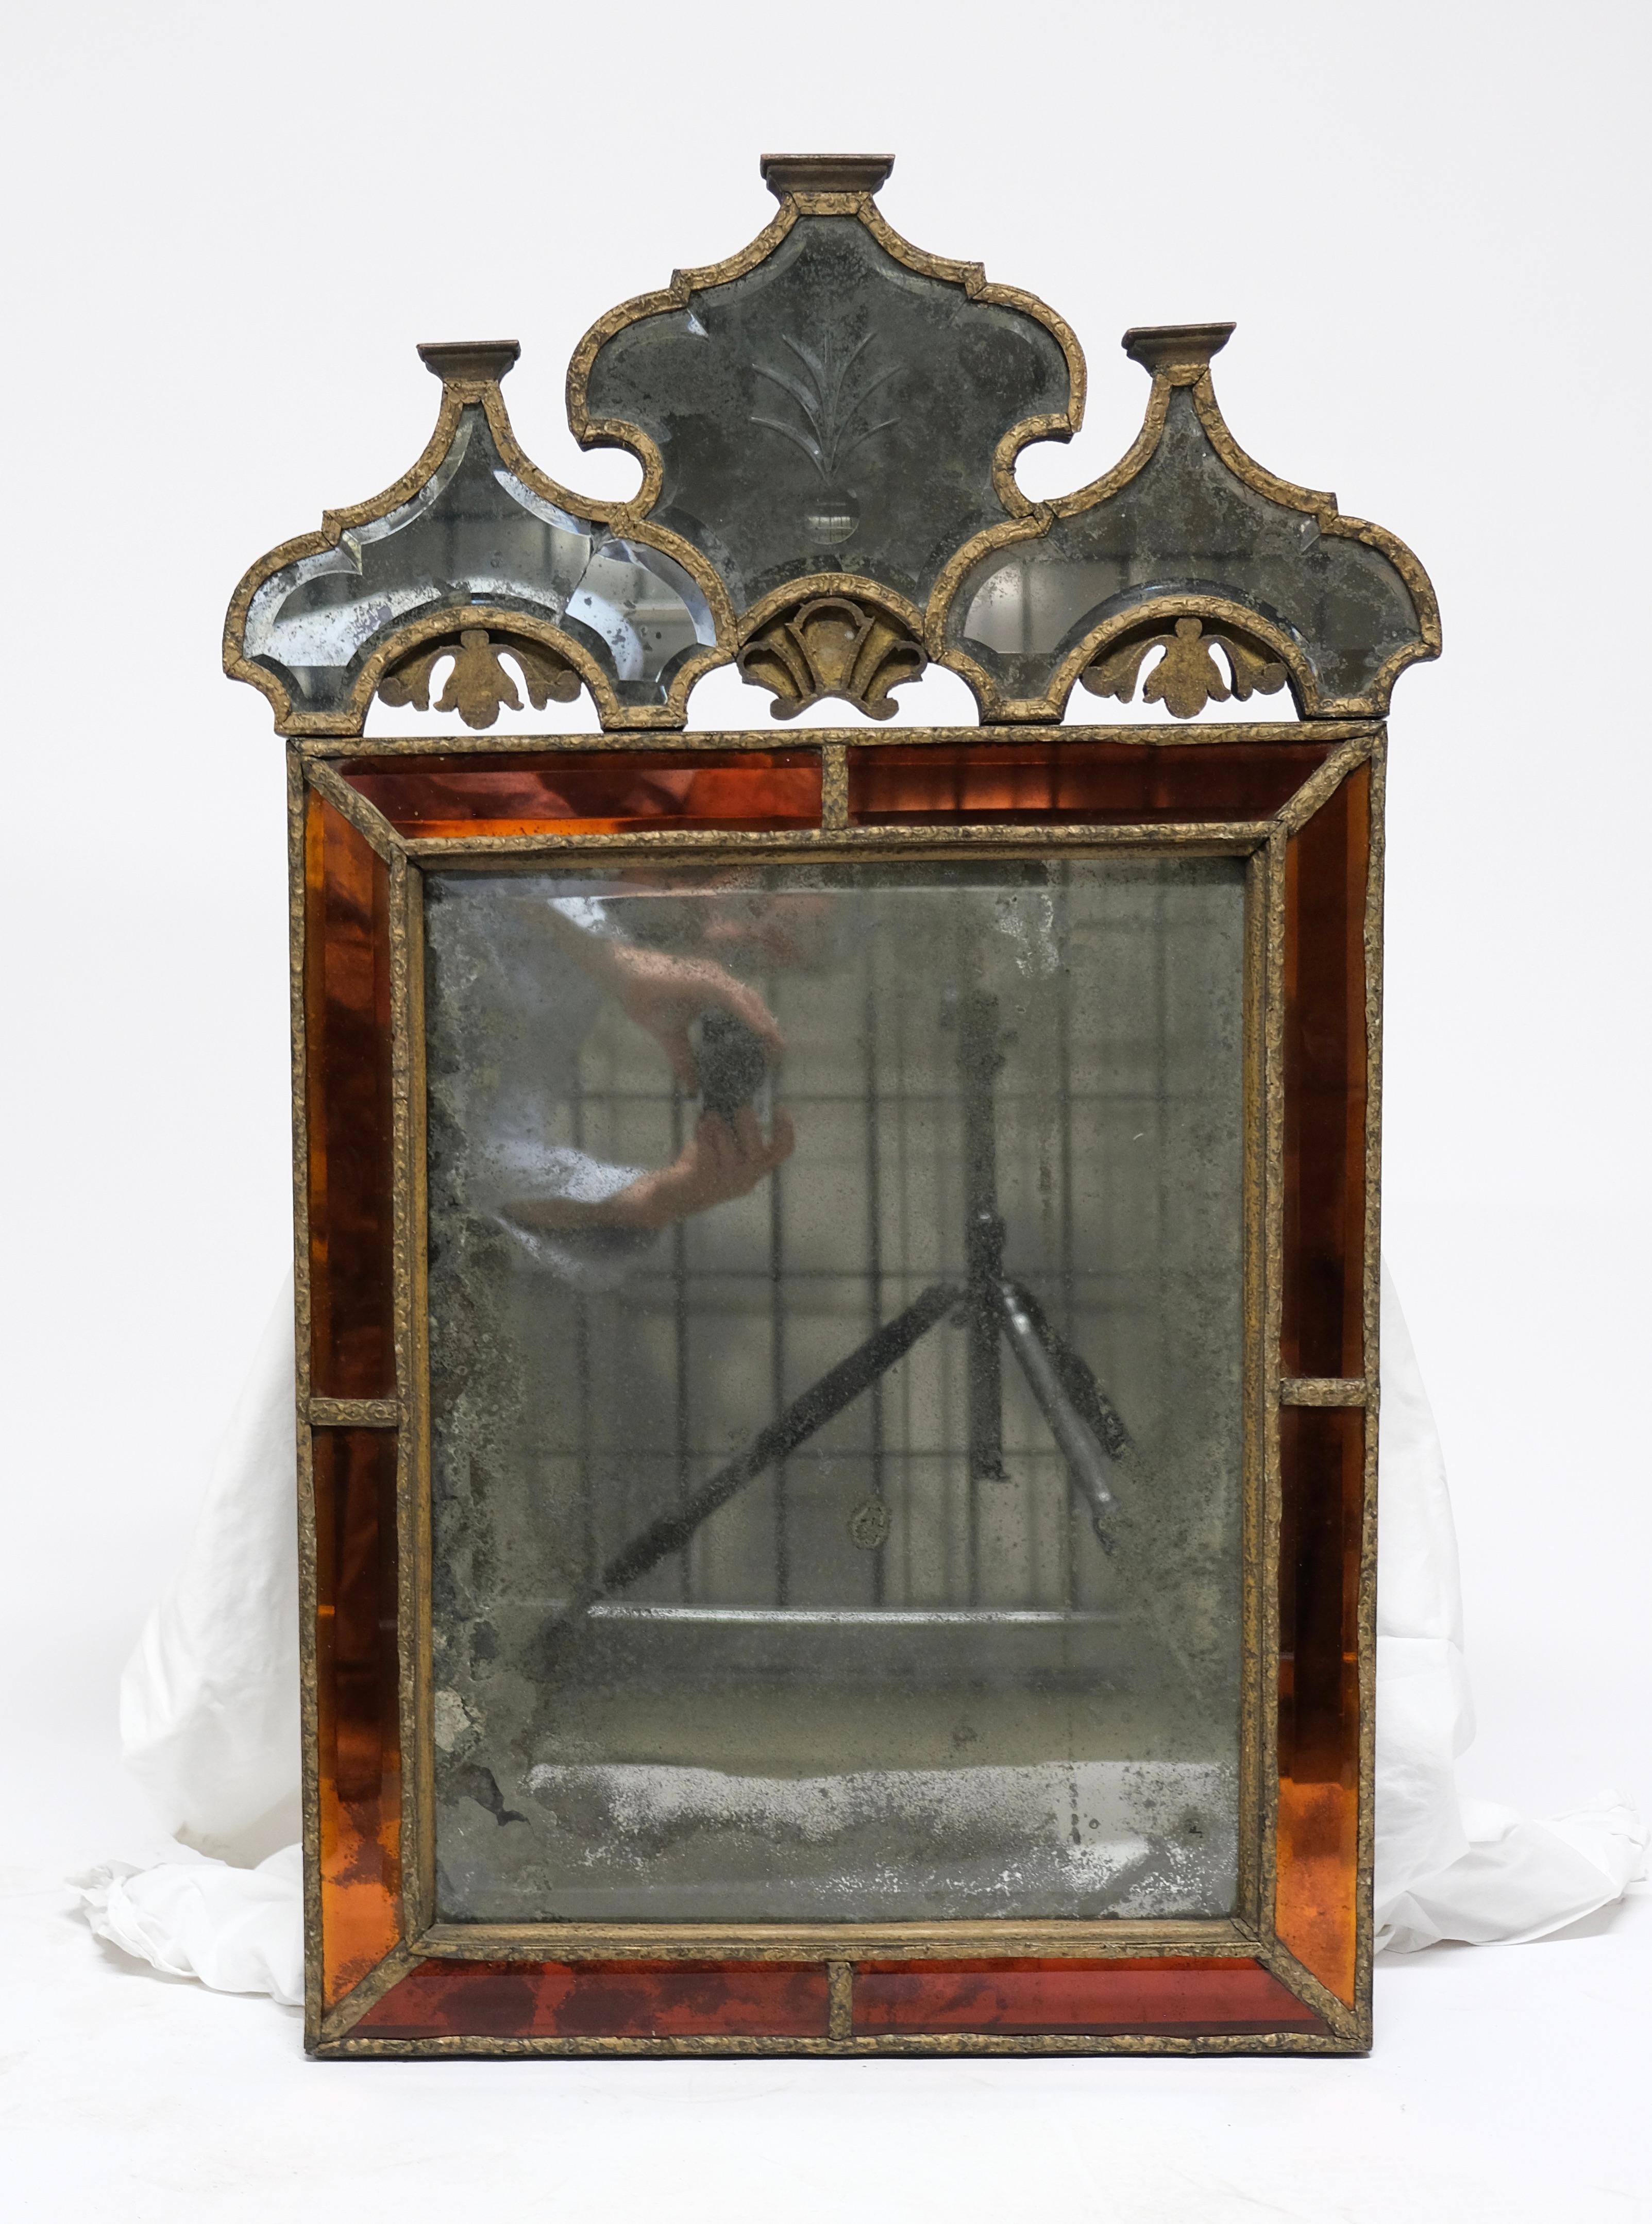 A untouched baroque-mirror made around year 1700. It still has its original mirror glass that is exclusive and rare with its cut edges. Around the mirror glass is a frame of amber coloured glass which is also is extremely unusual. The patina is